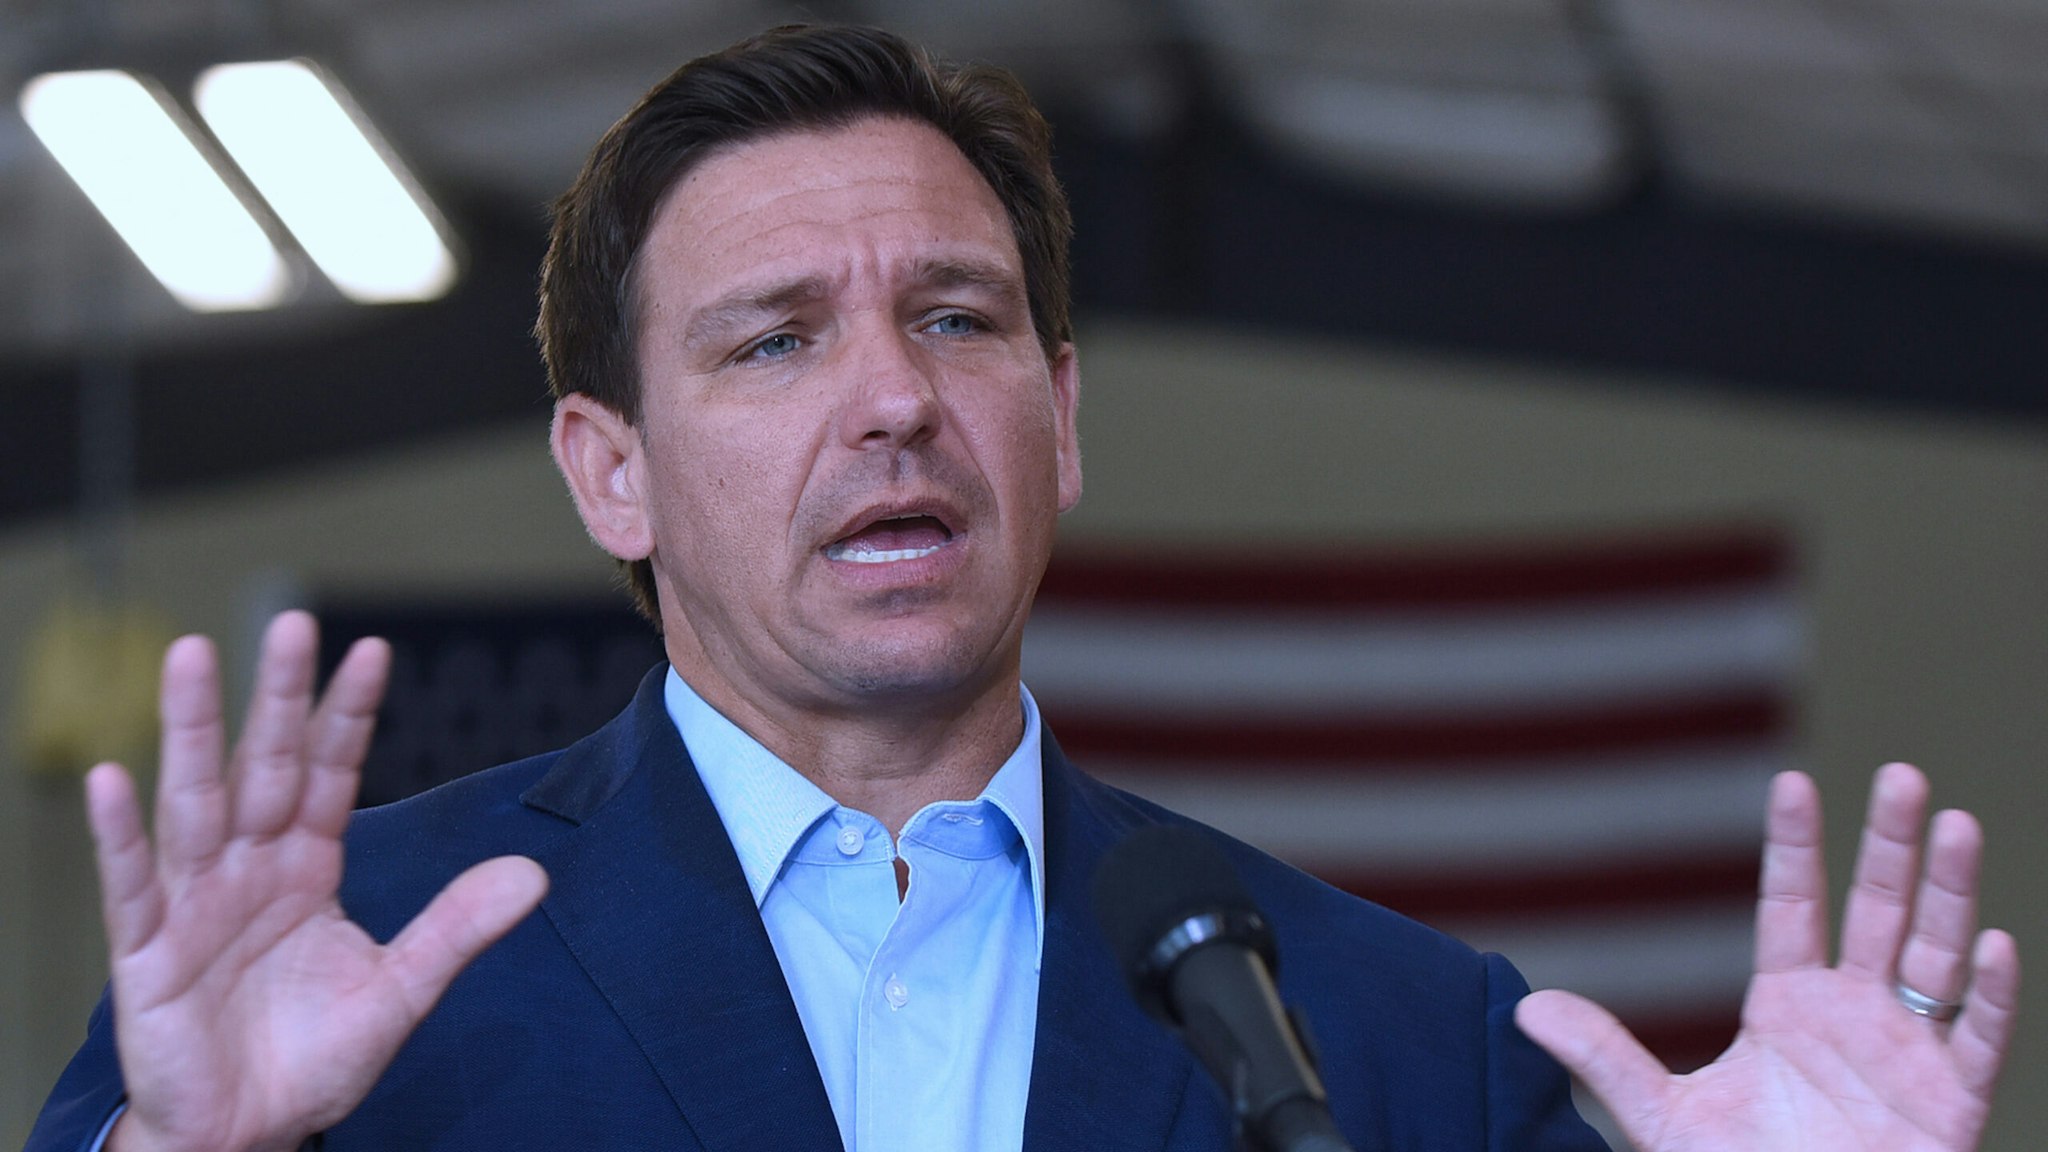 Florida Governor, Ron DeSantis speaks at a press conference at the Eau Gallie High School aviation hangar.